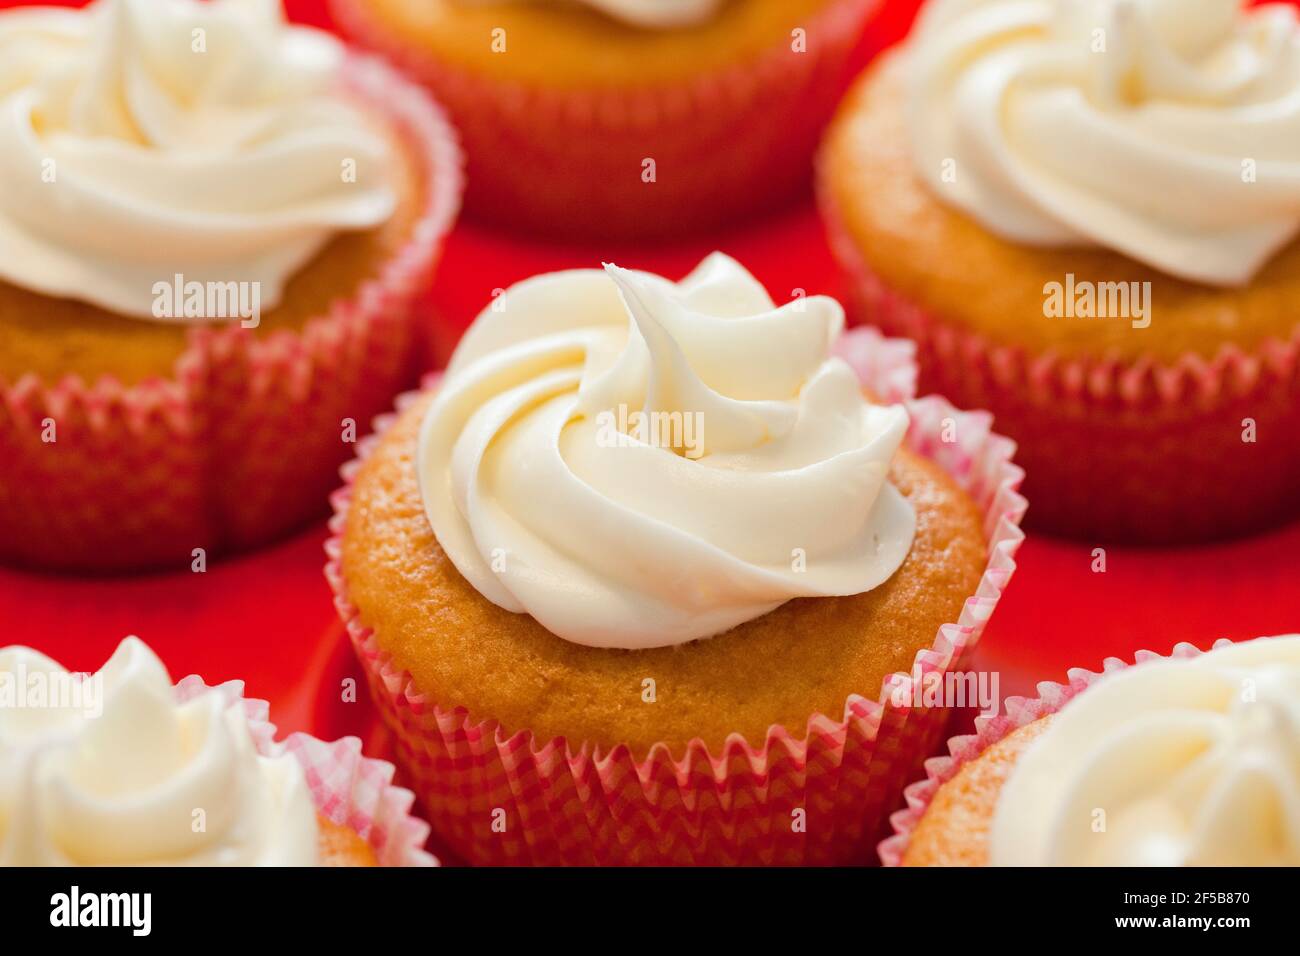 Homemade cupcakes with white frosting Stock Photo